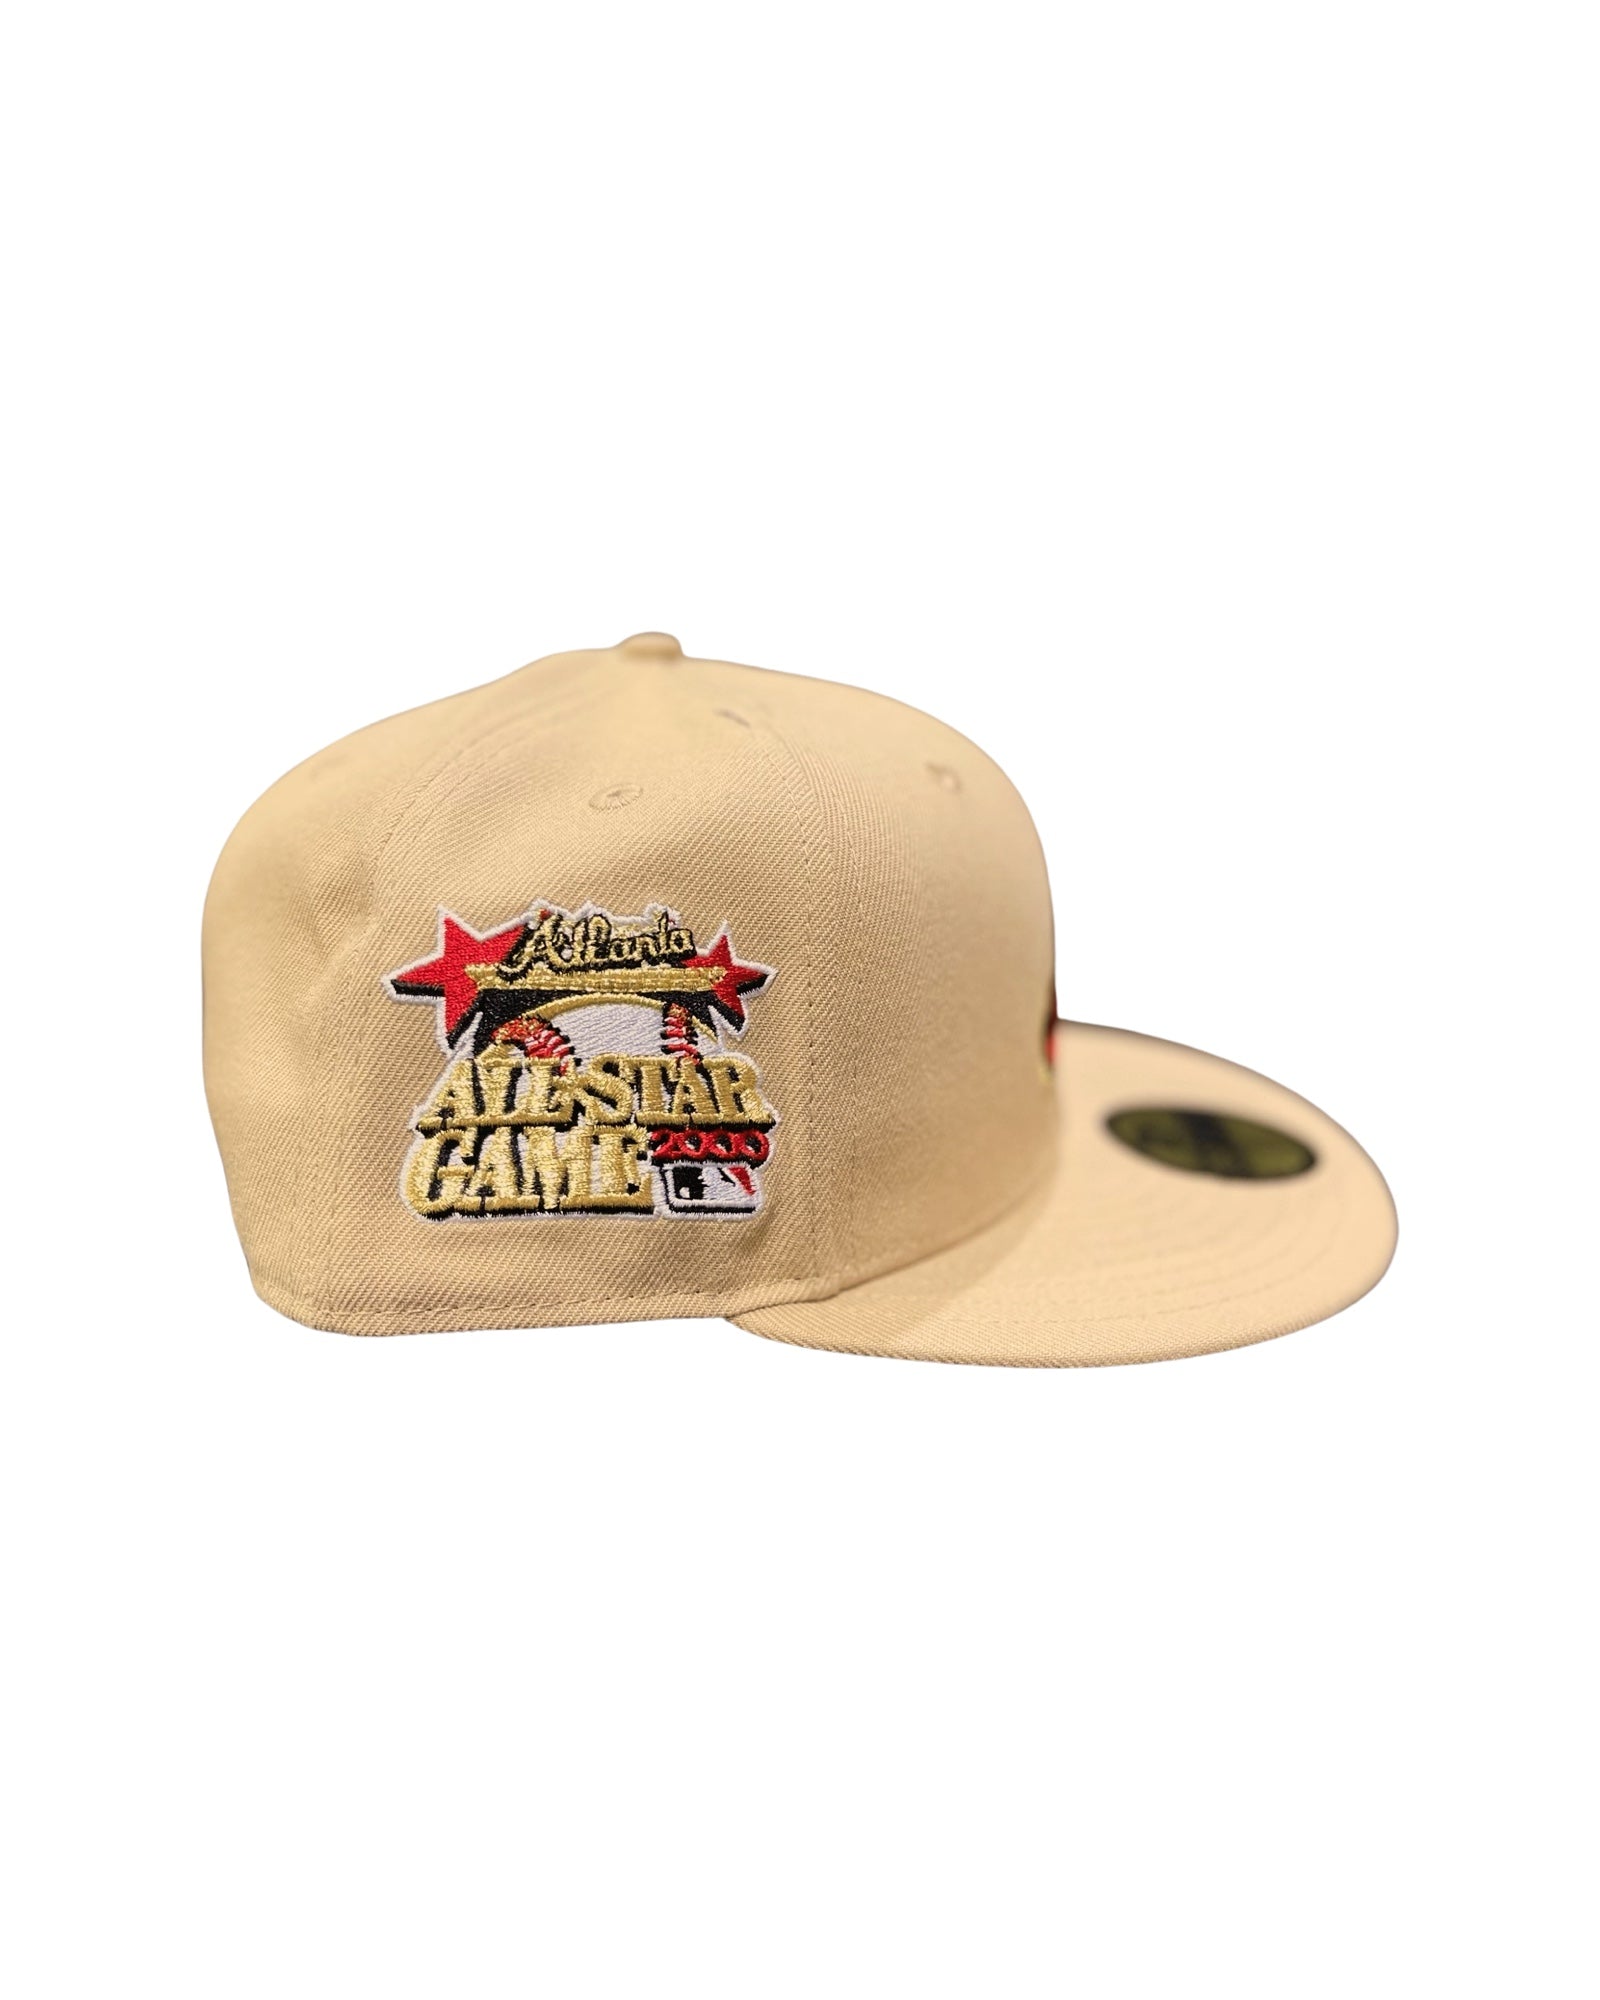 Buy New Era Atlanta Braves Camel Fitted Hat at In Style – InStyle-Tuscaloosa